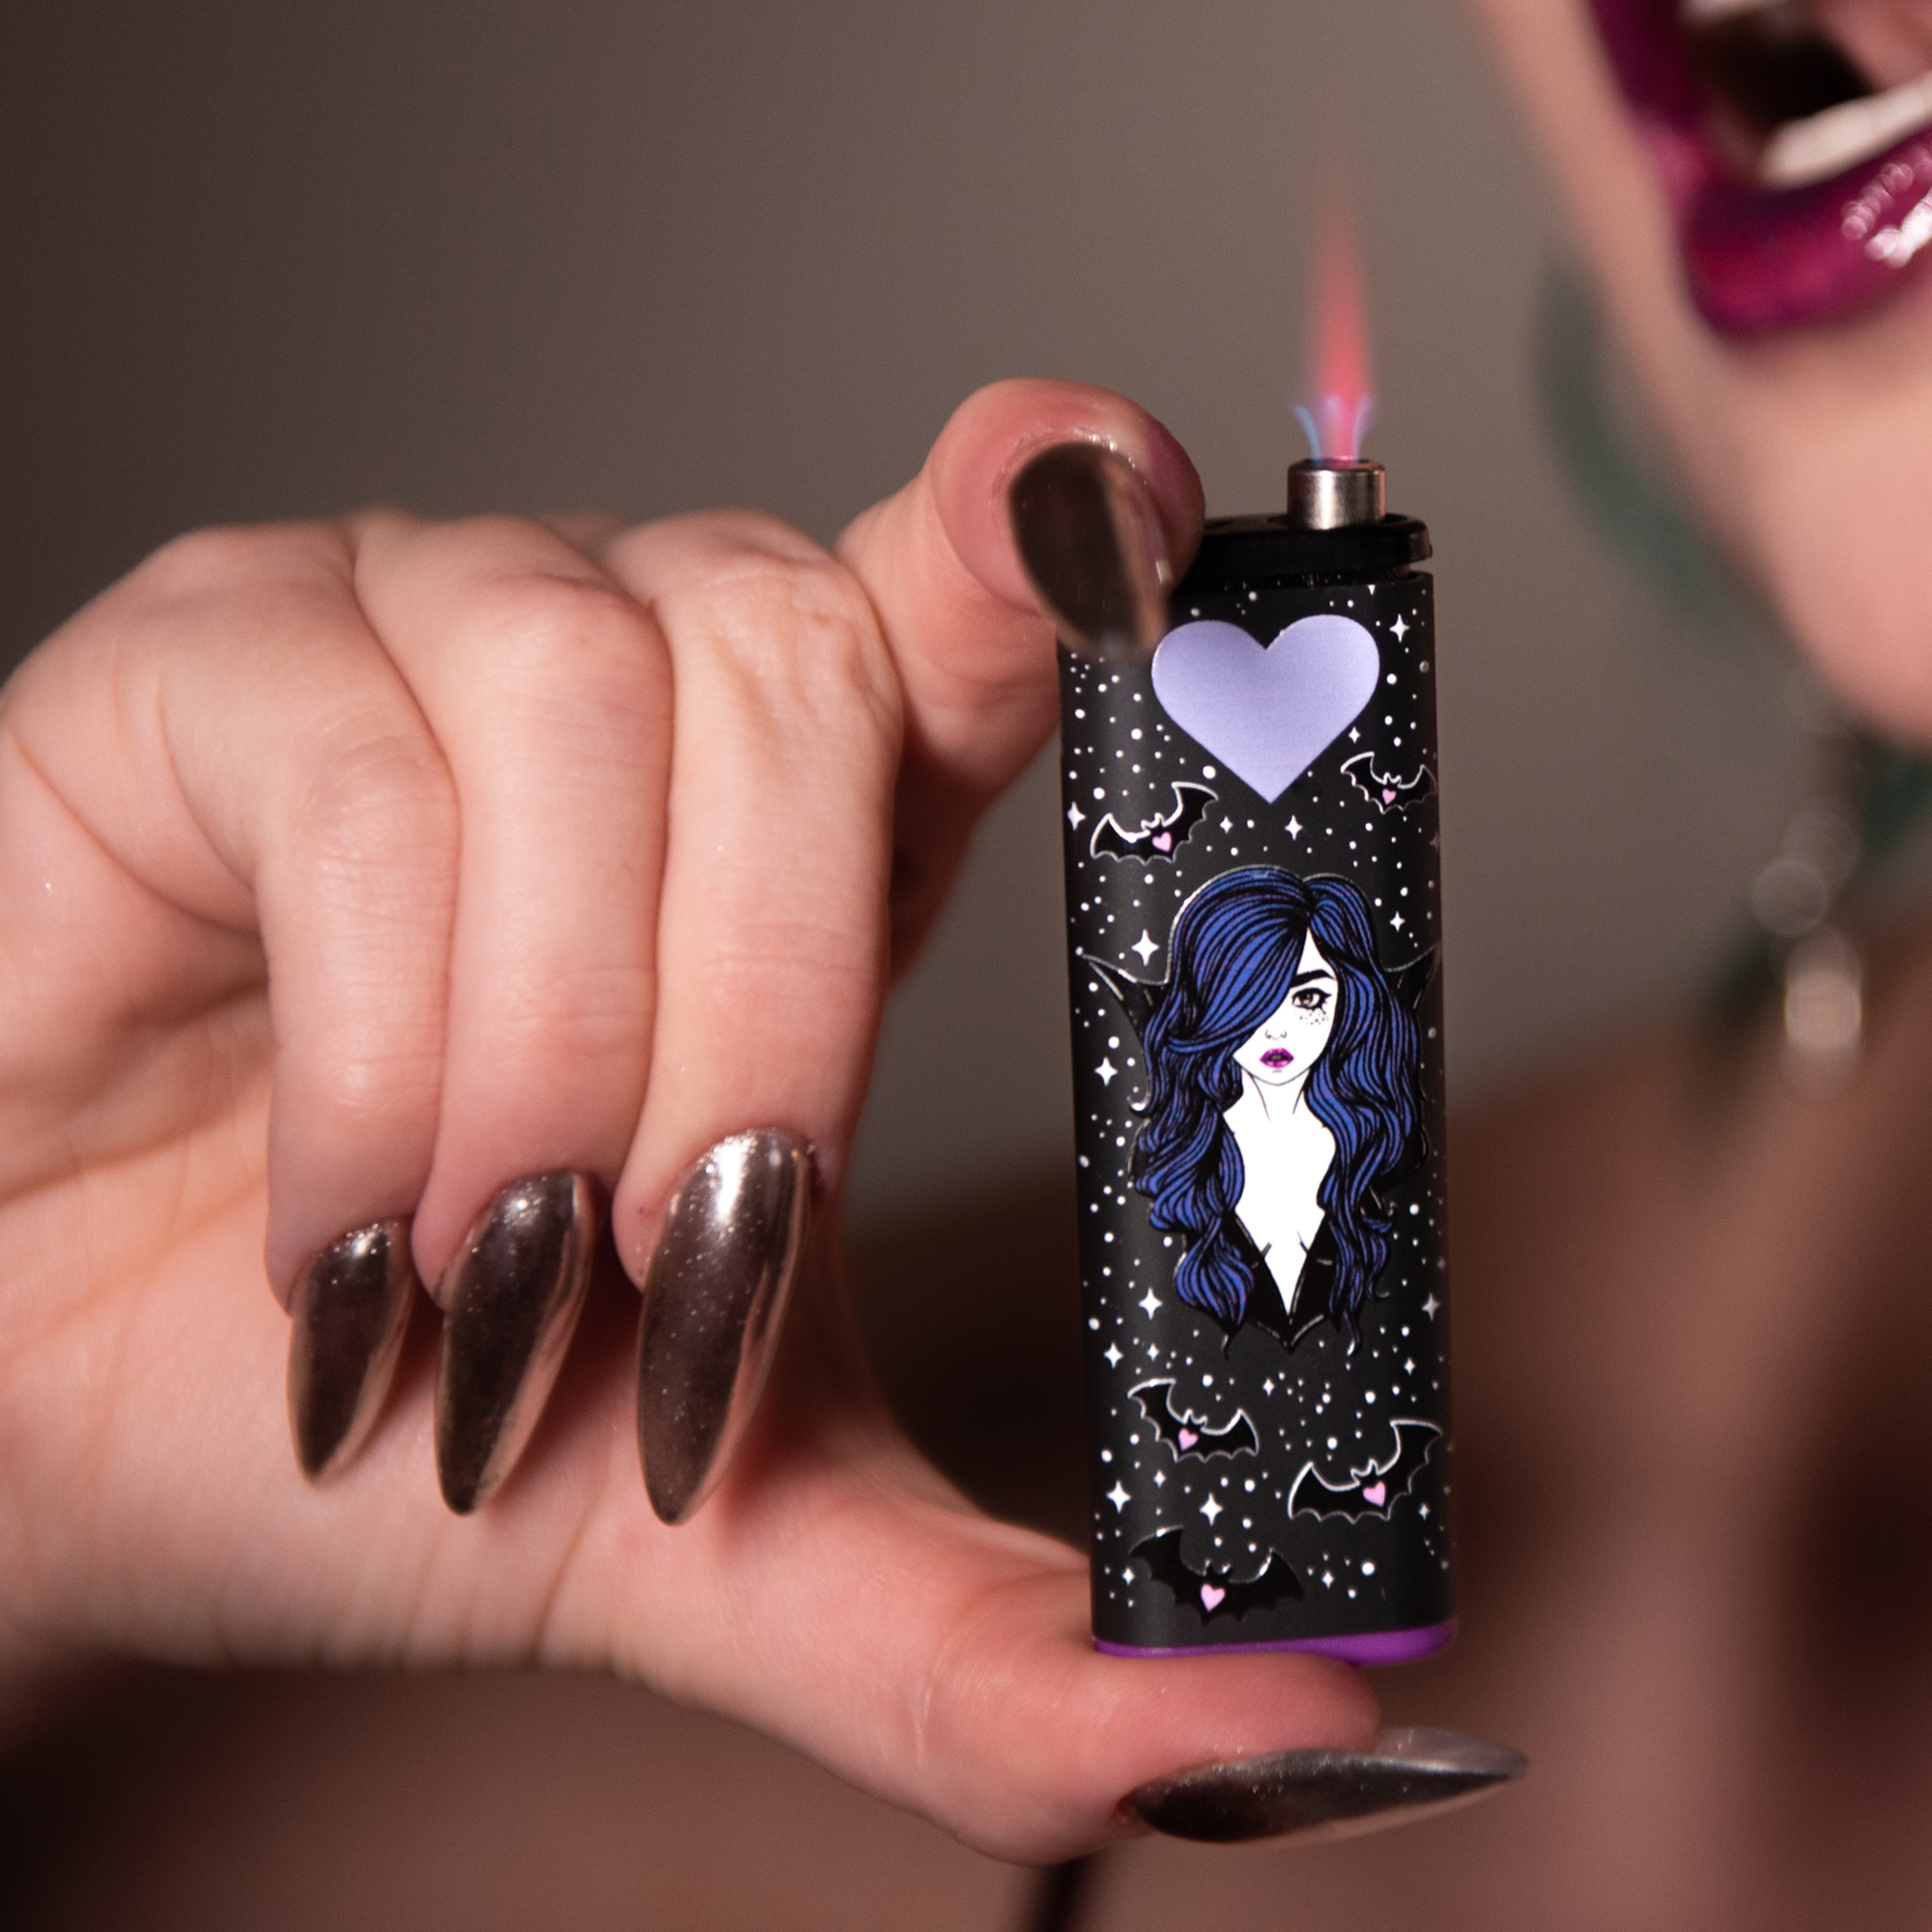 Cute Lighters for Stoners - Vamp Babe Torch Lighter